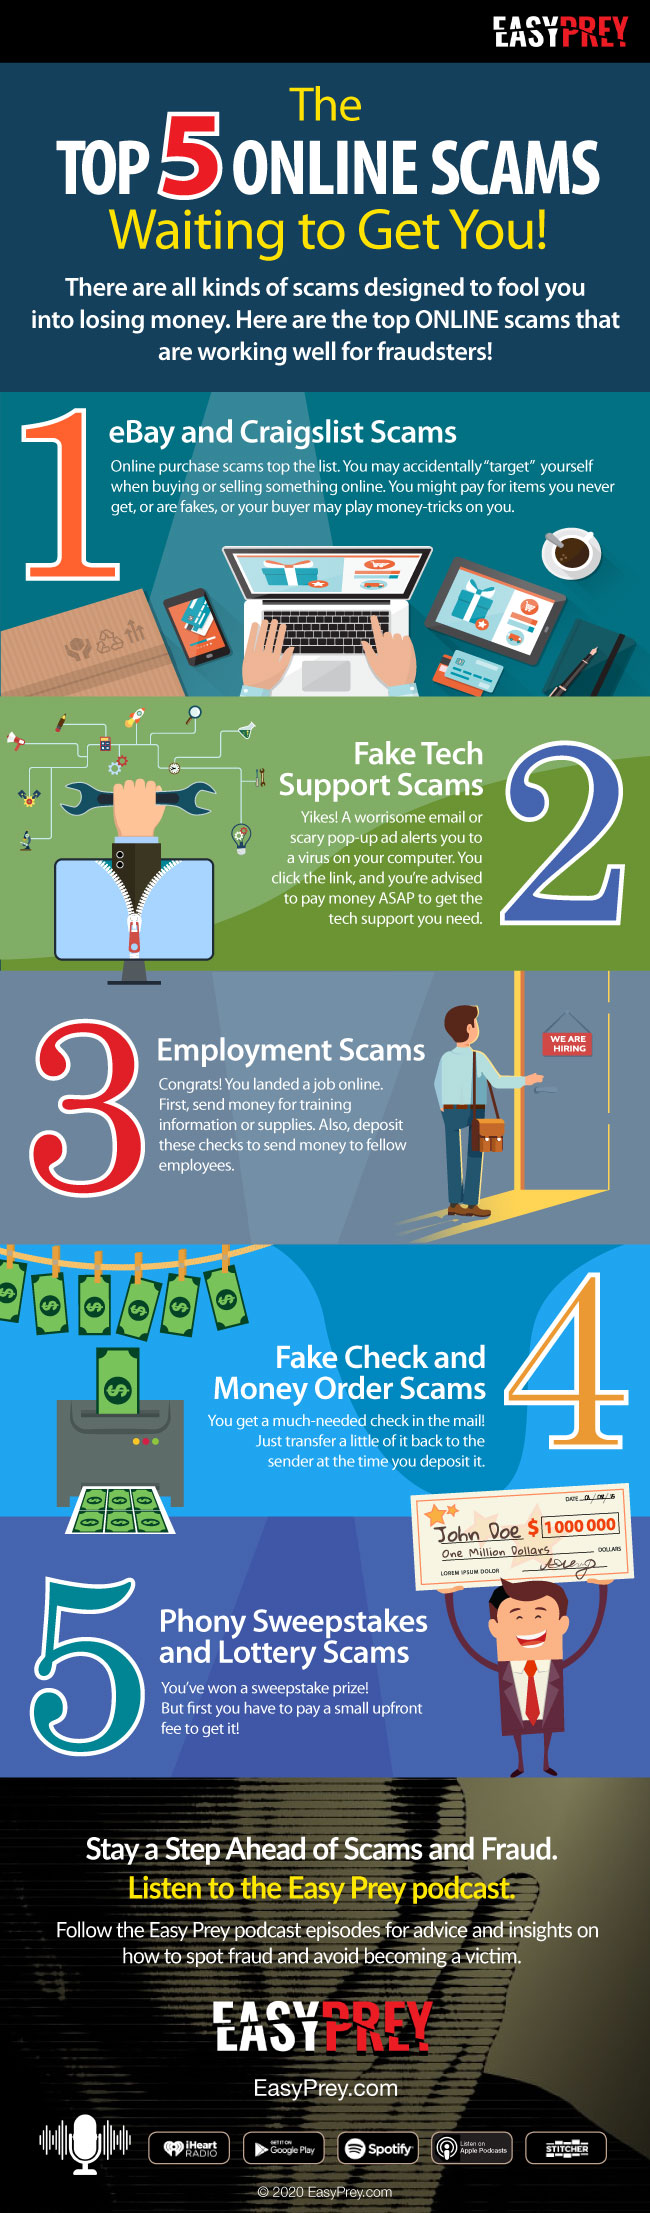 The Top 5 Online Scams Infographic